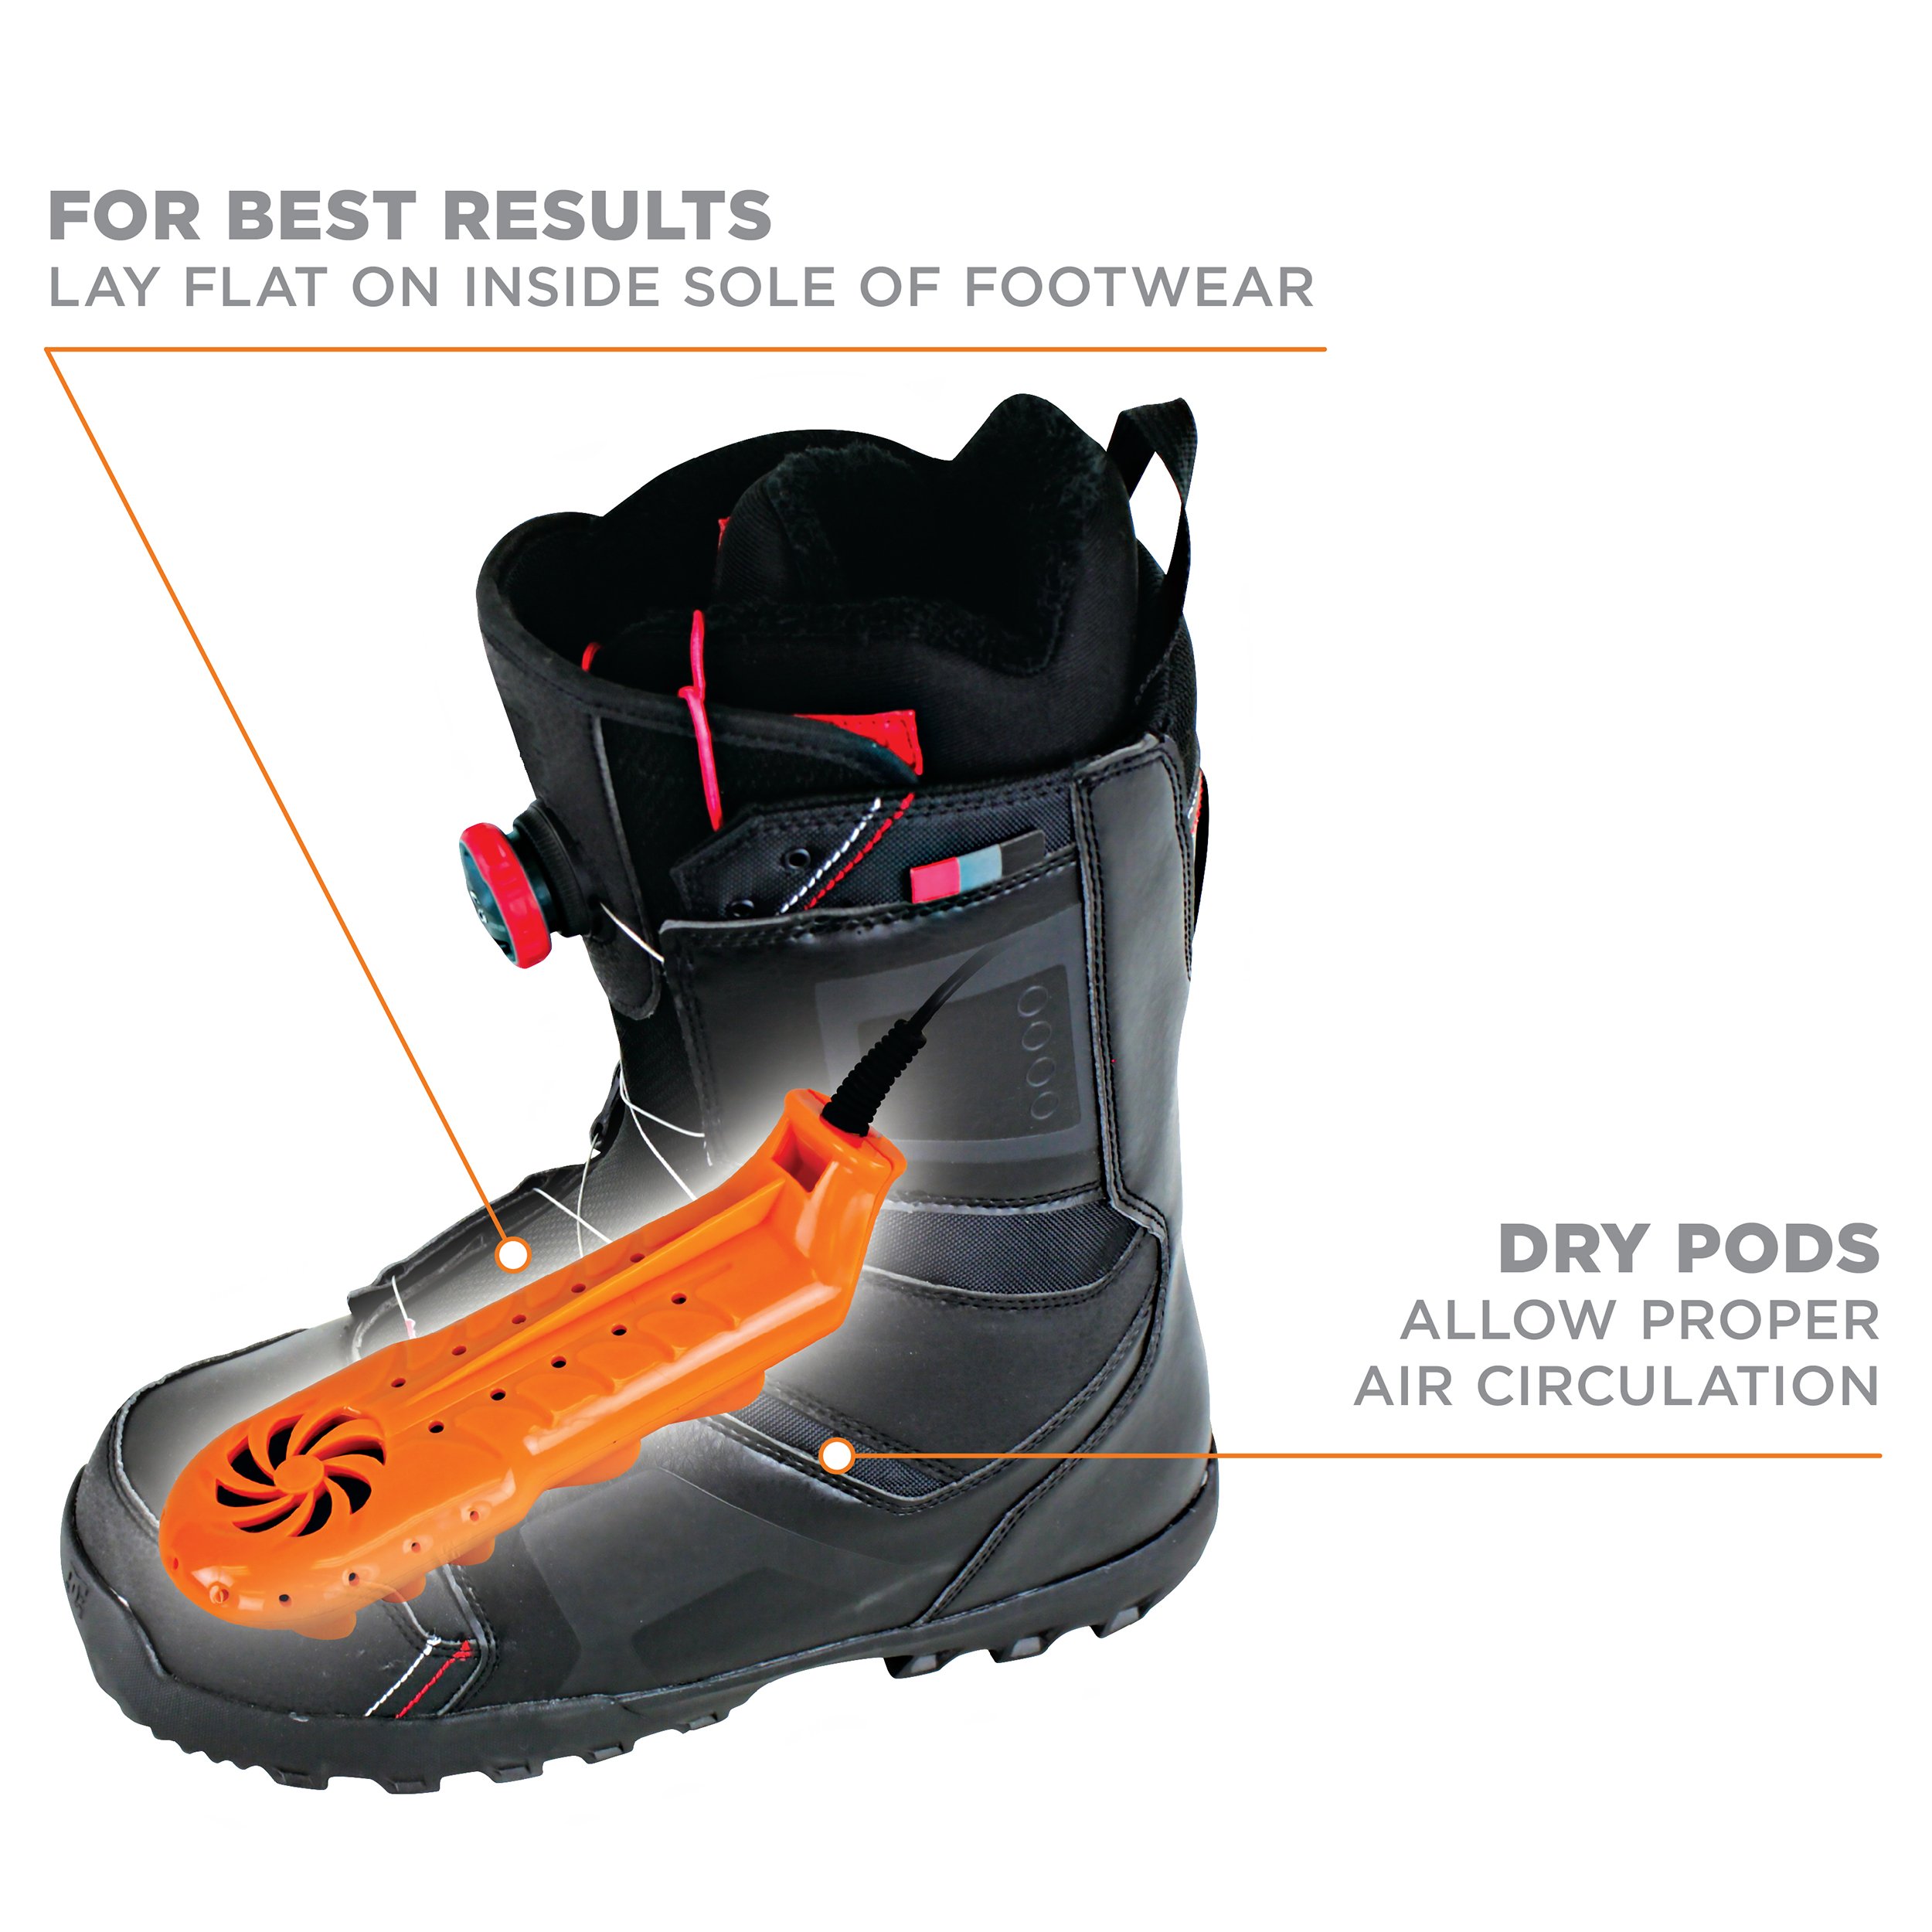 DryGuy Solutions to All Your Wet & Sweaty Shoes, Force Dry + Travel Boot Warmer, Bundle